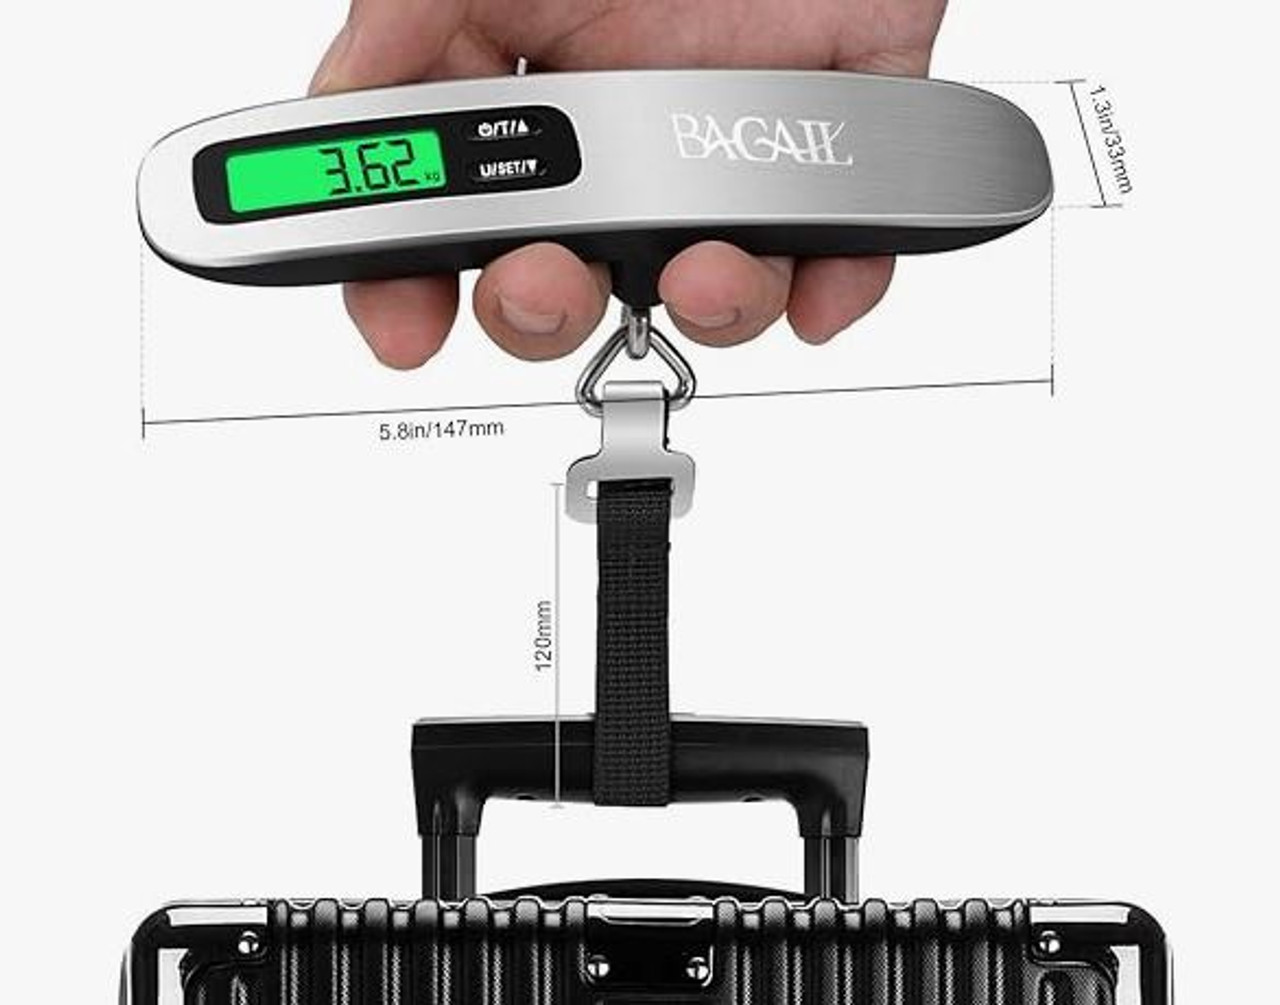 Travel Scale Digital Luggage Bagail - A. Ally & Sons